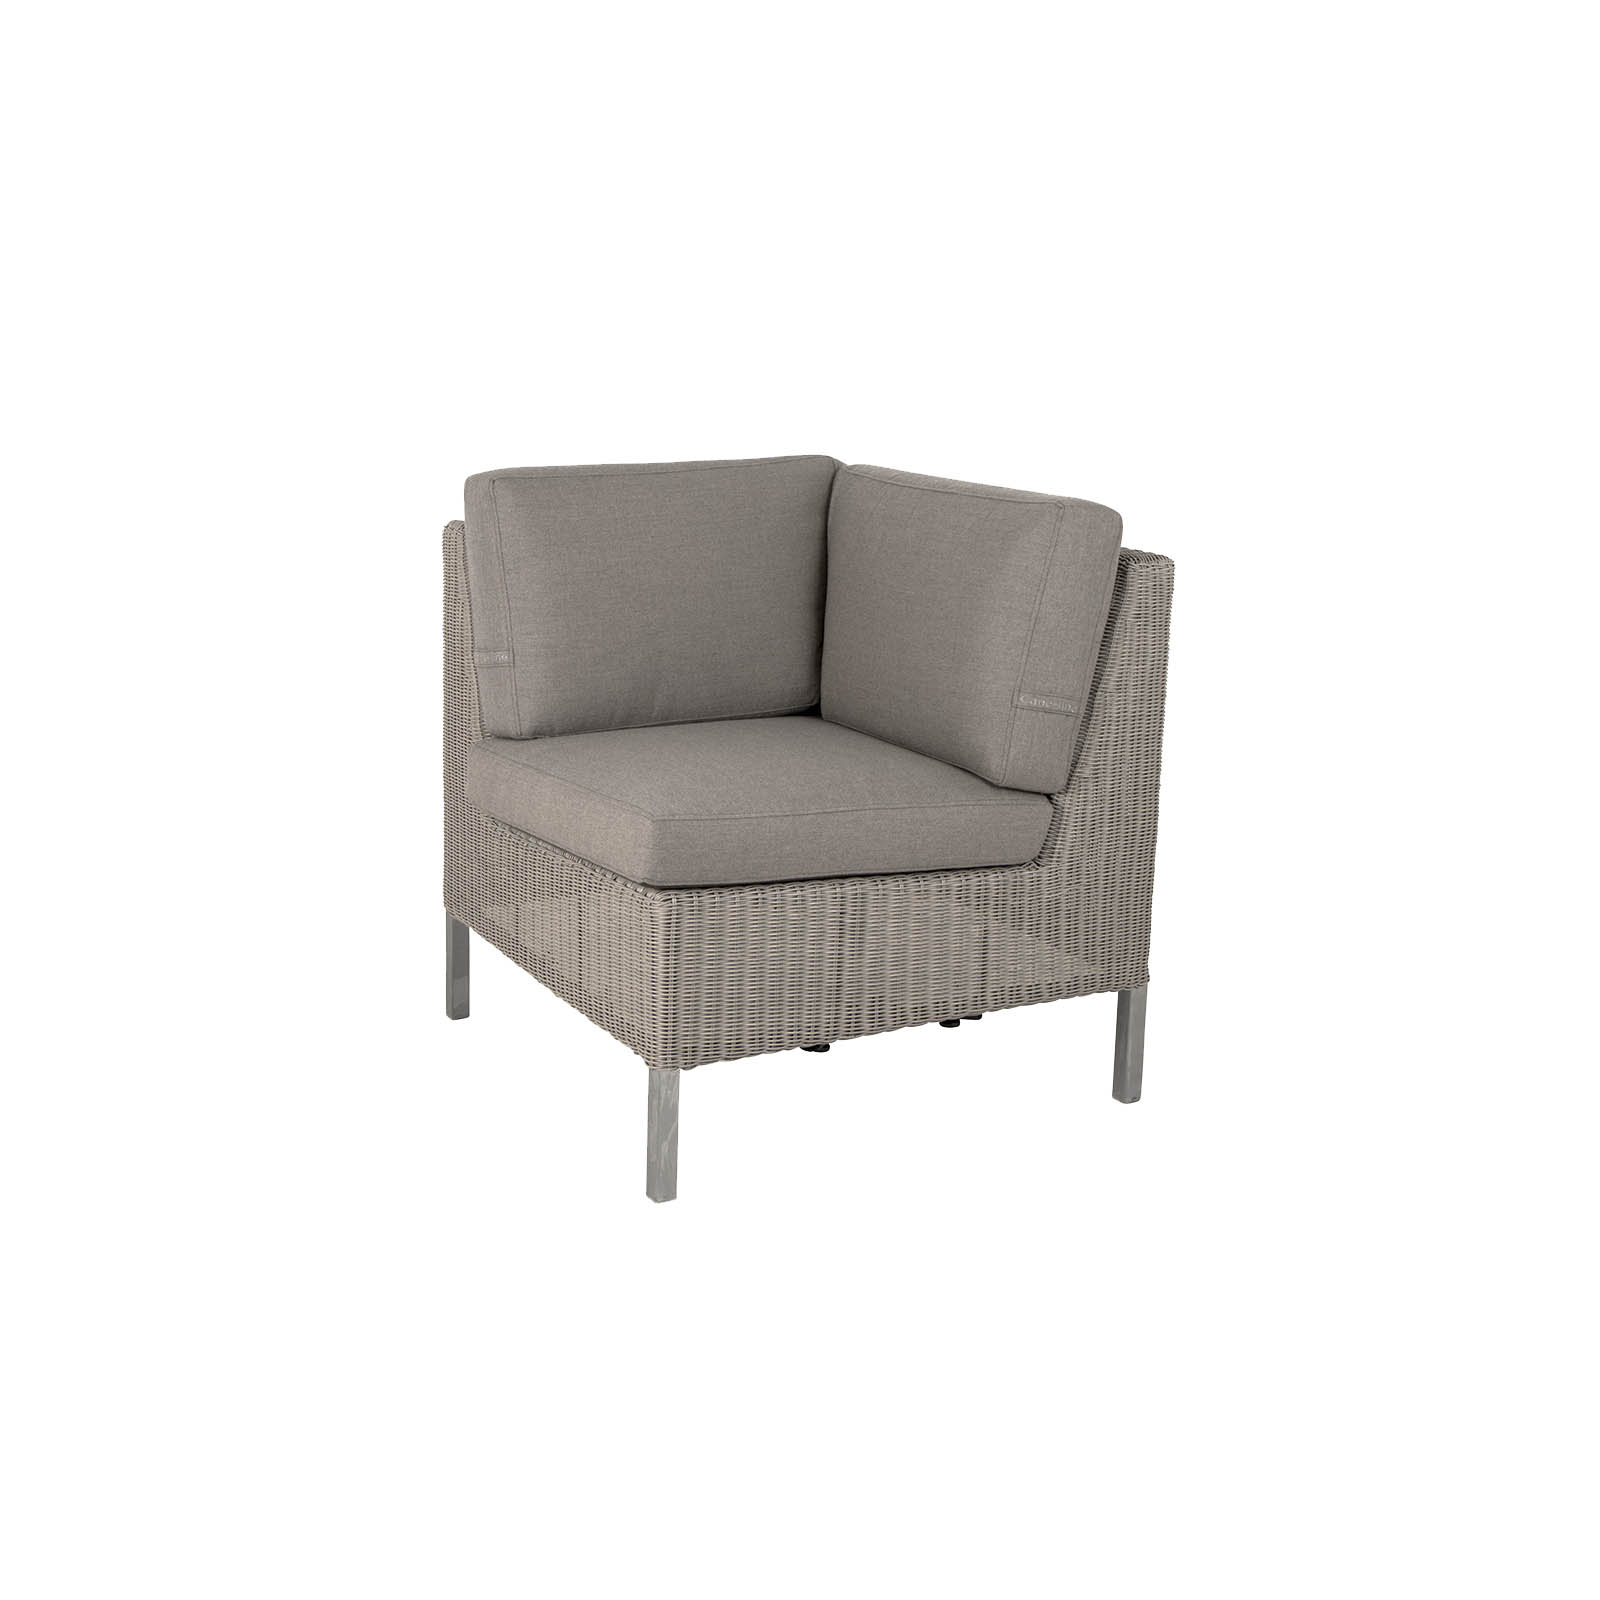 Connect Dining Lounge Sofa Eckmodul aus Cane-line Weave in Taupe mit Kissen aus Cane-line Natté in Taupe